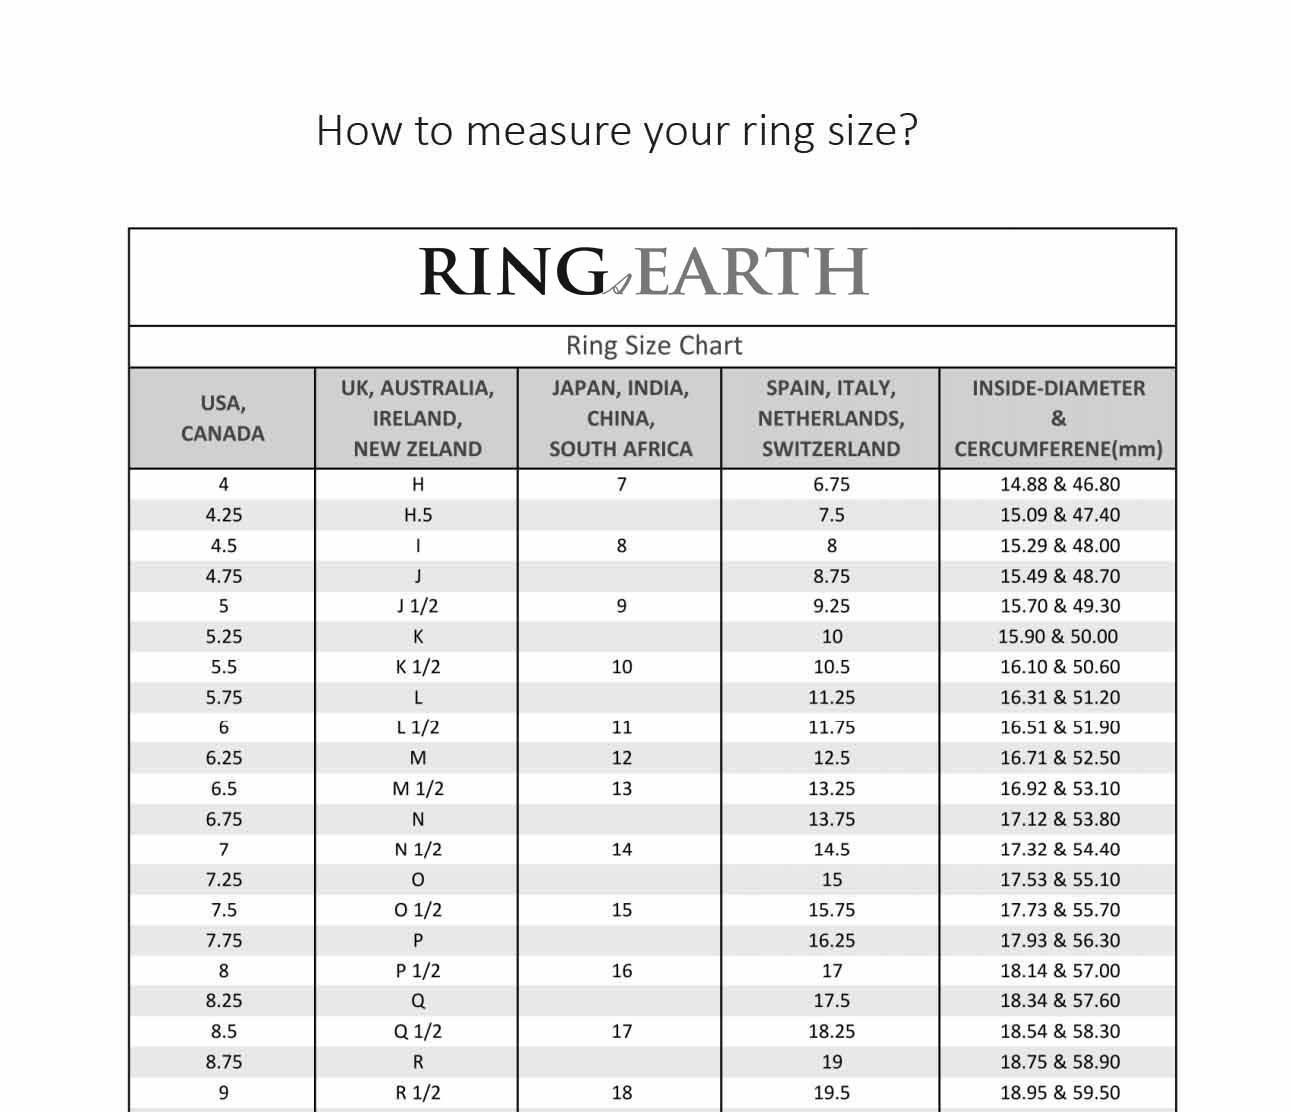 Find Your Ring size? - RingsEarth